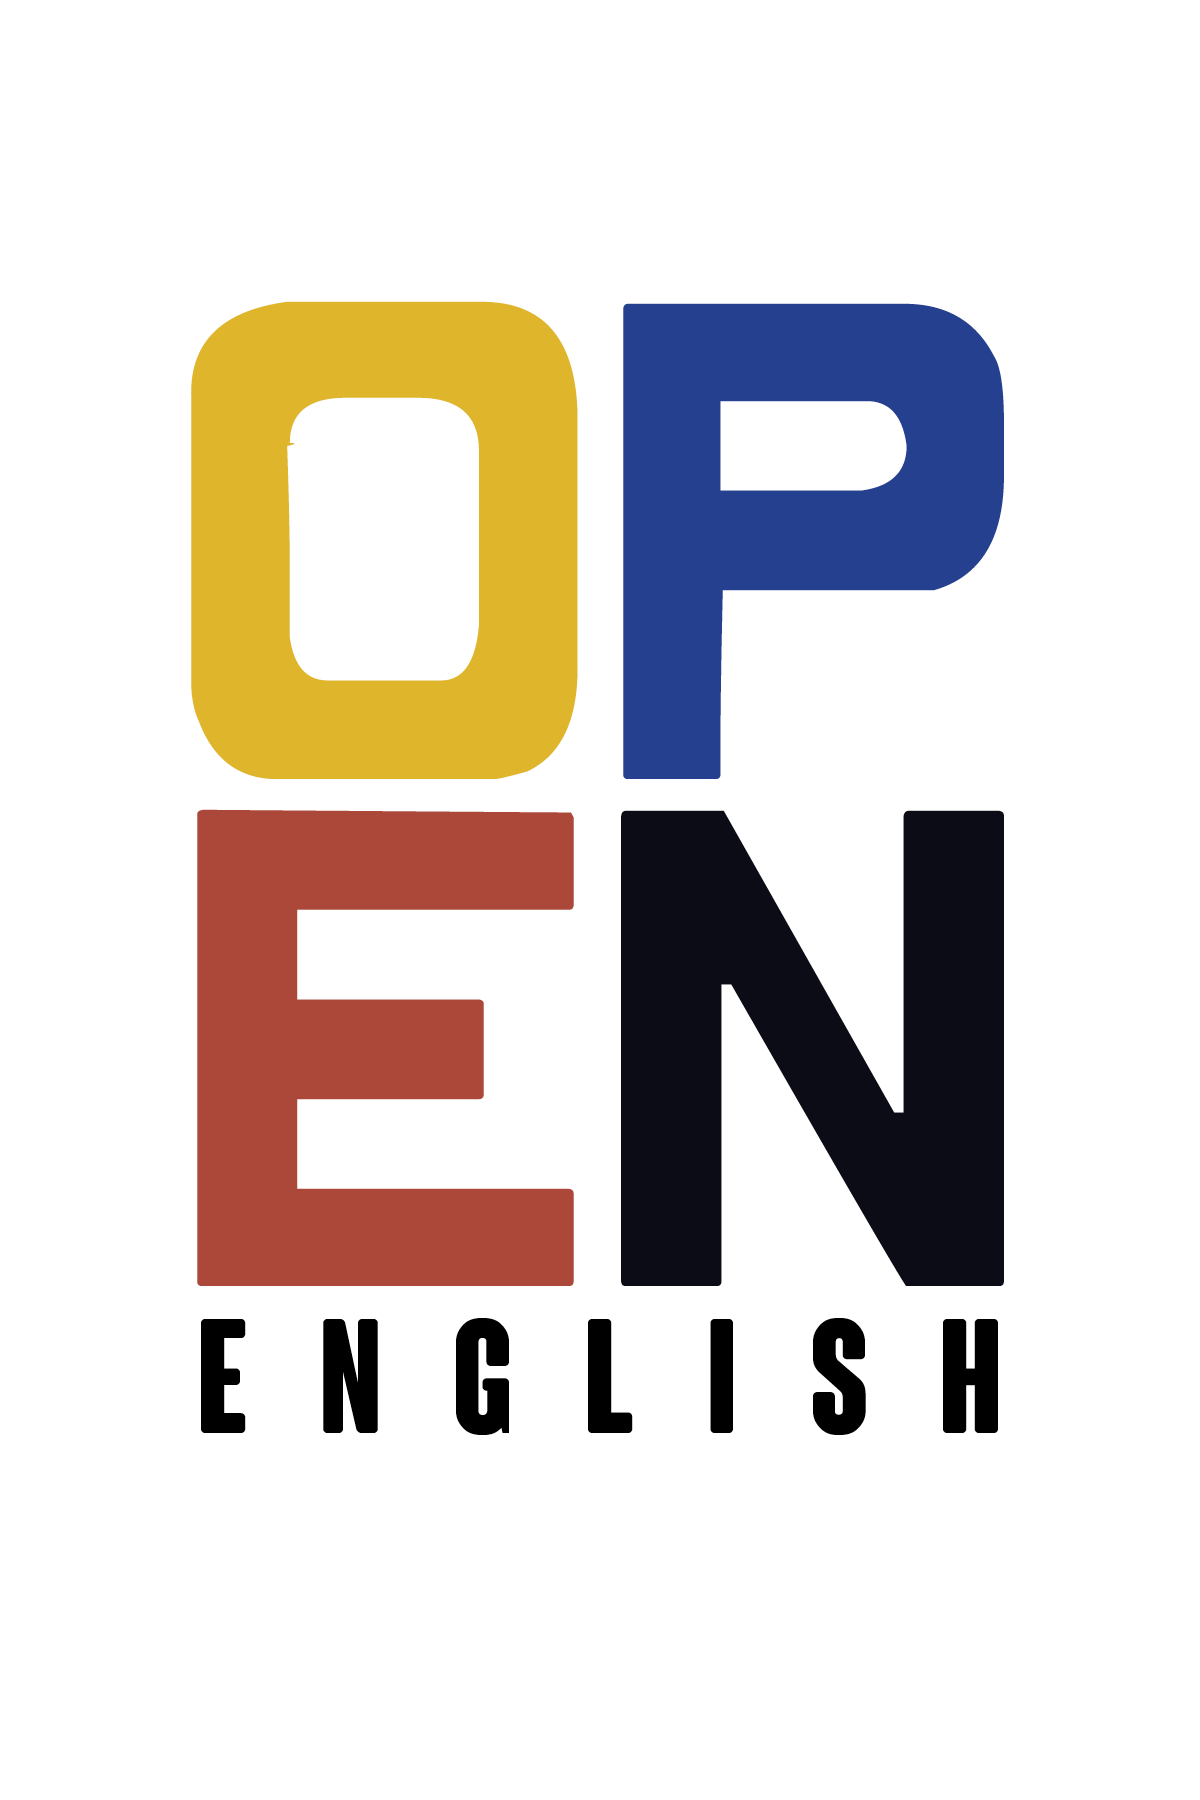 Open English Reviews  Read Customer Service Reviews of www.openenglish.com